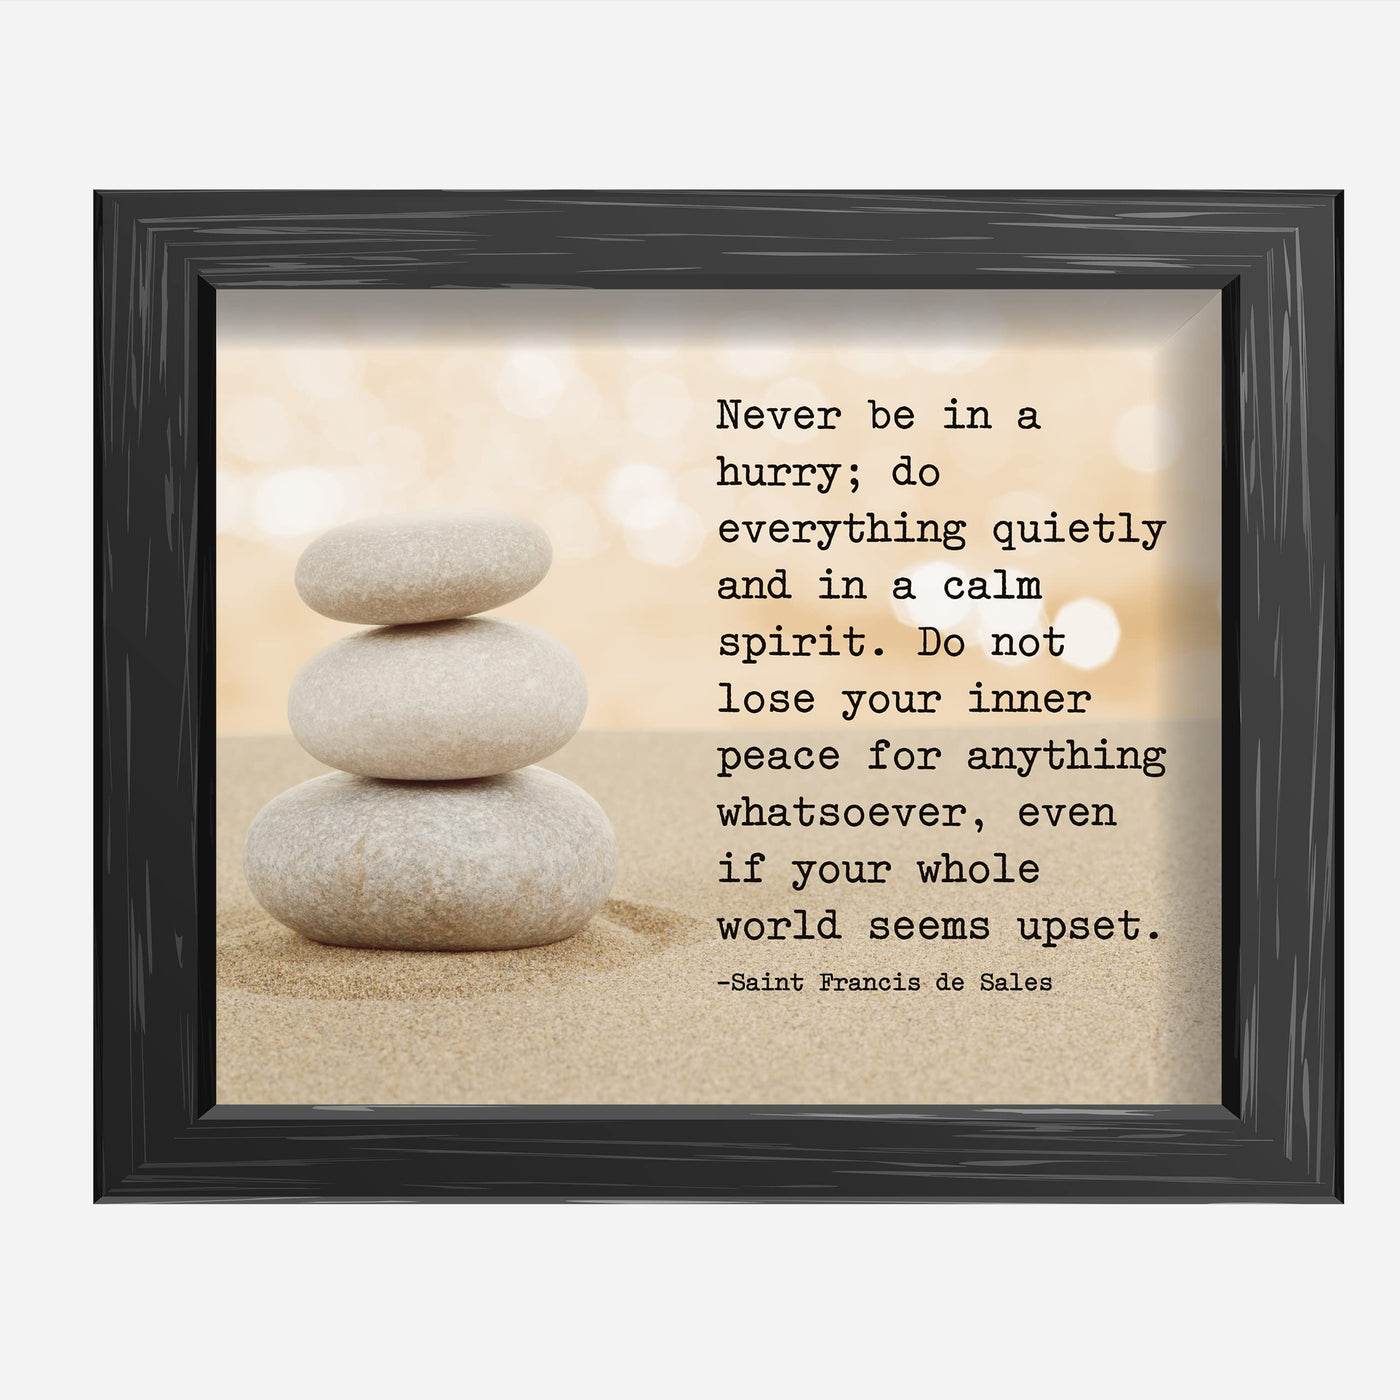 Do Not Lose Your Inner Peace Motivational Quotes Wall Sign -10 x 8" Inspirational Balancing Stones in Sand Art Print -Ready to Frame. Spiritual Home-Office-School-Zen Decor. Perfect Life Lesson!